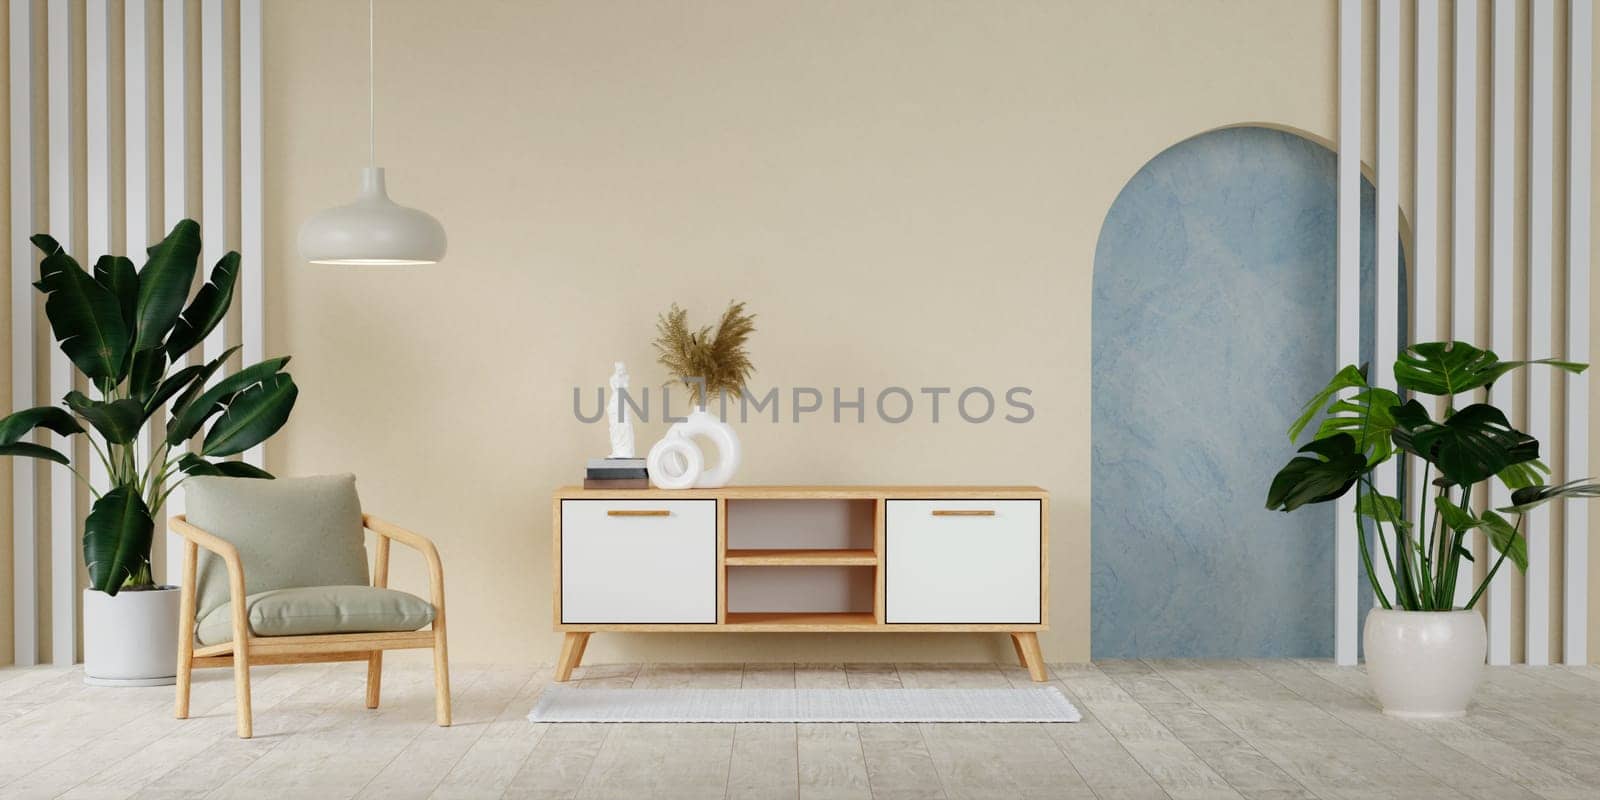 beige minimalist living room interior with cabinet chair and plant on a wooden floor. Home Nordic interior. Scandinavian interior poster mock up. 3D render illustration by meepiangraphic